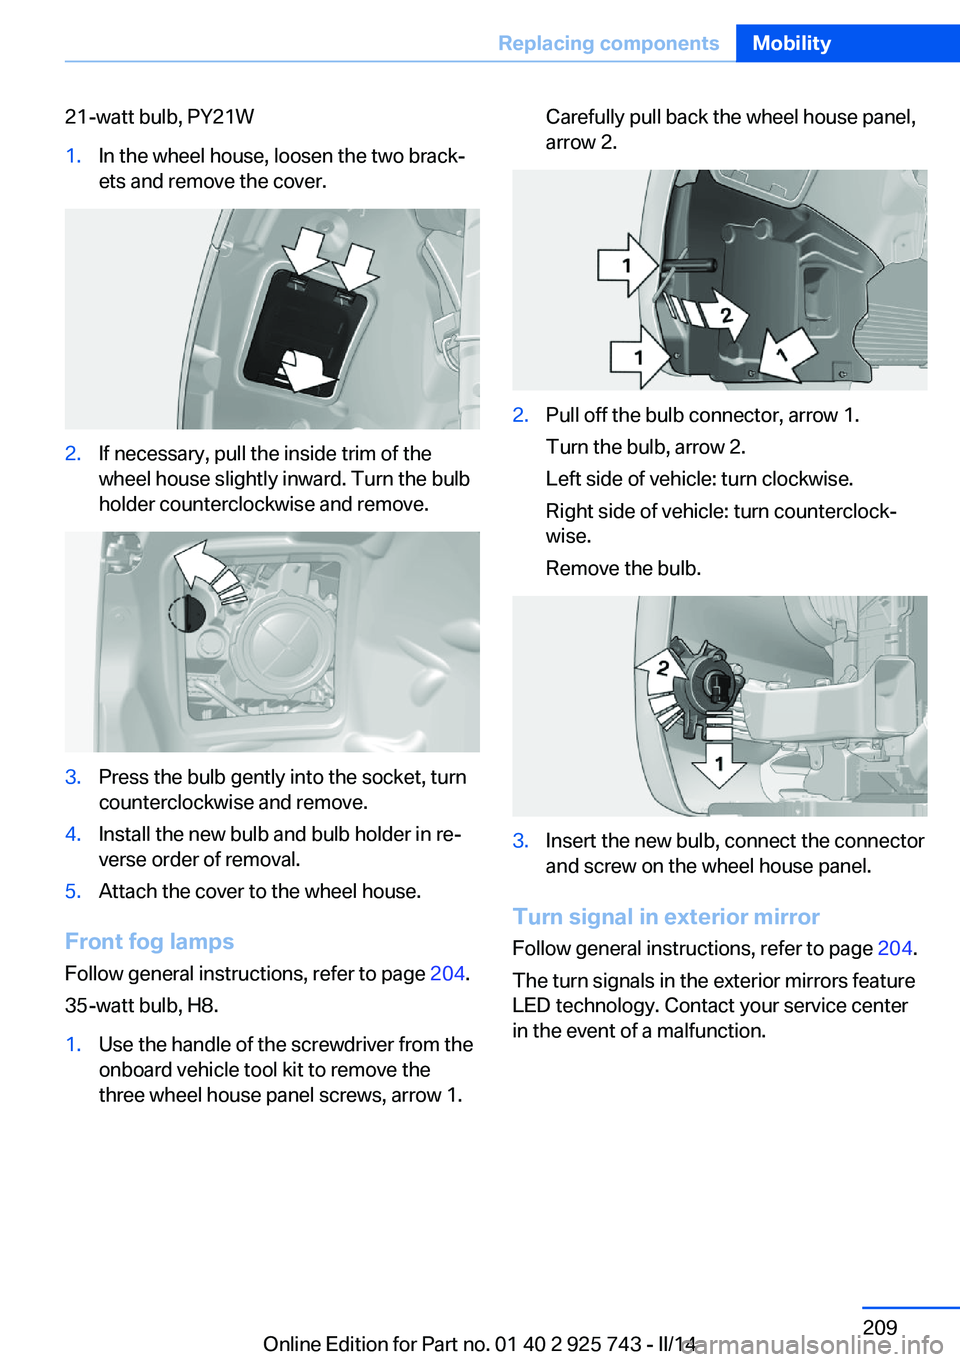 BMW 335I XDRIVE 2014  Owners Manual 21-watt bulb, PY21W1.In the wheel house, loosen the two brack‐
ets and remove the cover.2.If necessary, pull the inside trim of the
wheel house slightly inward. Turn the bulb
holder counterclockwise